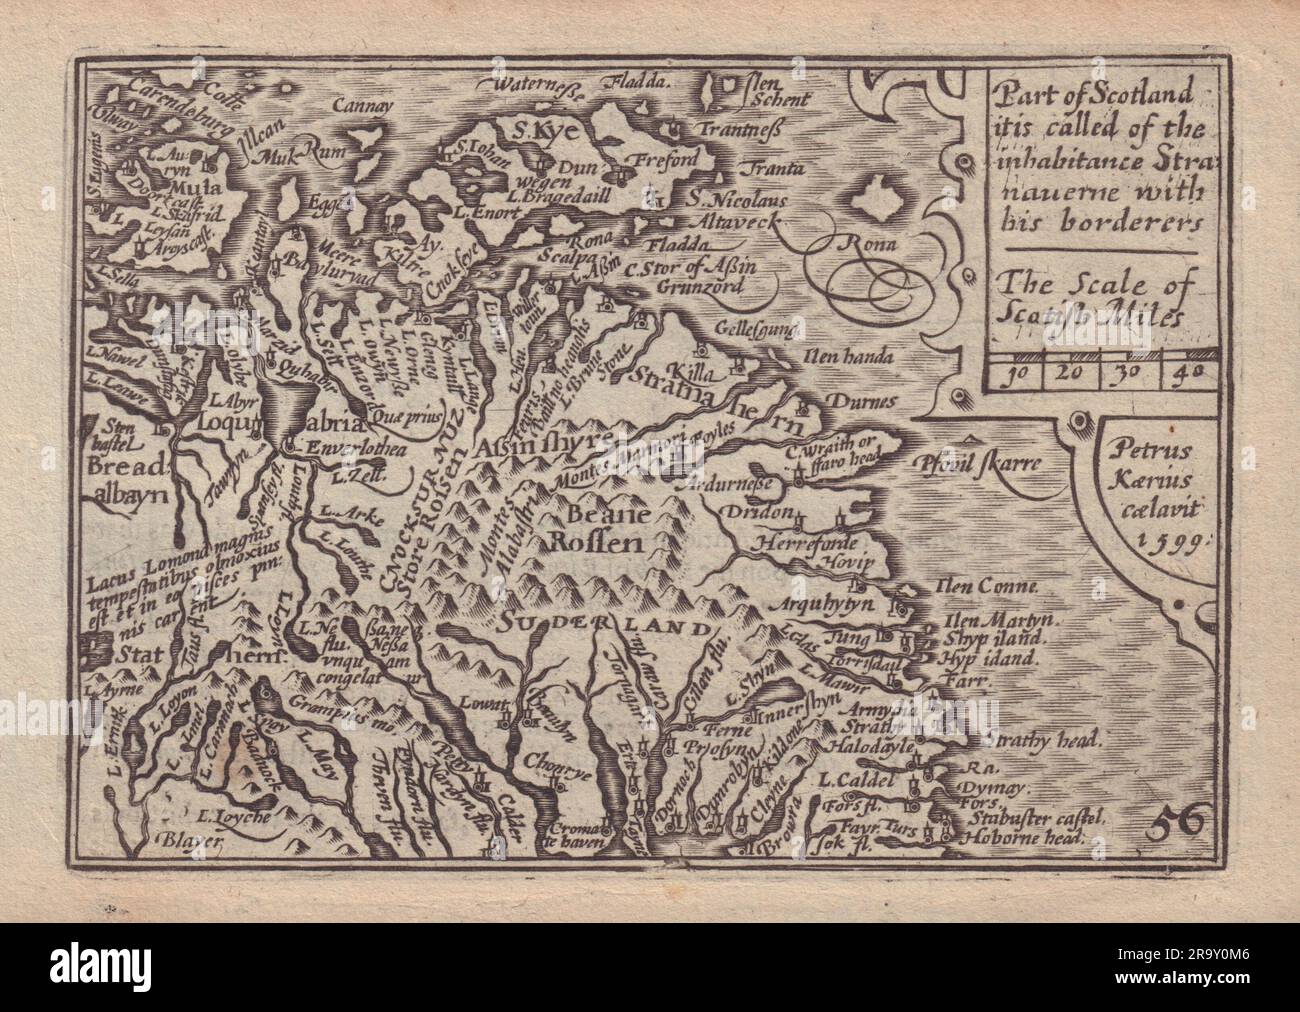 Part of Scotland… by Keere. 'Speed miniature' Highlands Islands Skye 1632 map Stock Photo